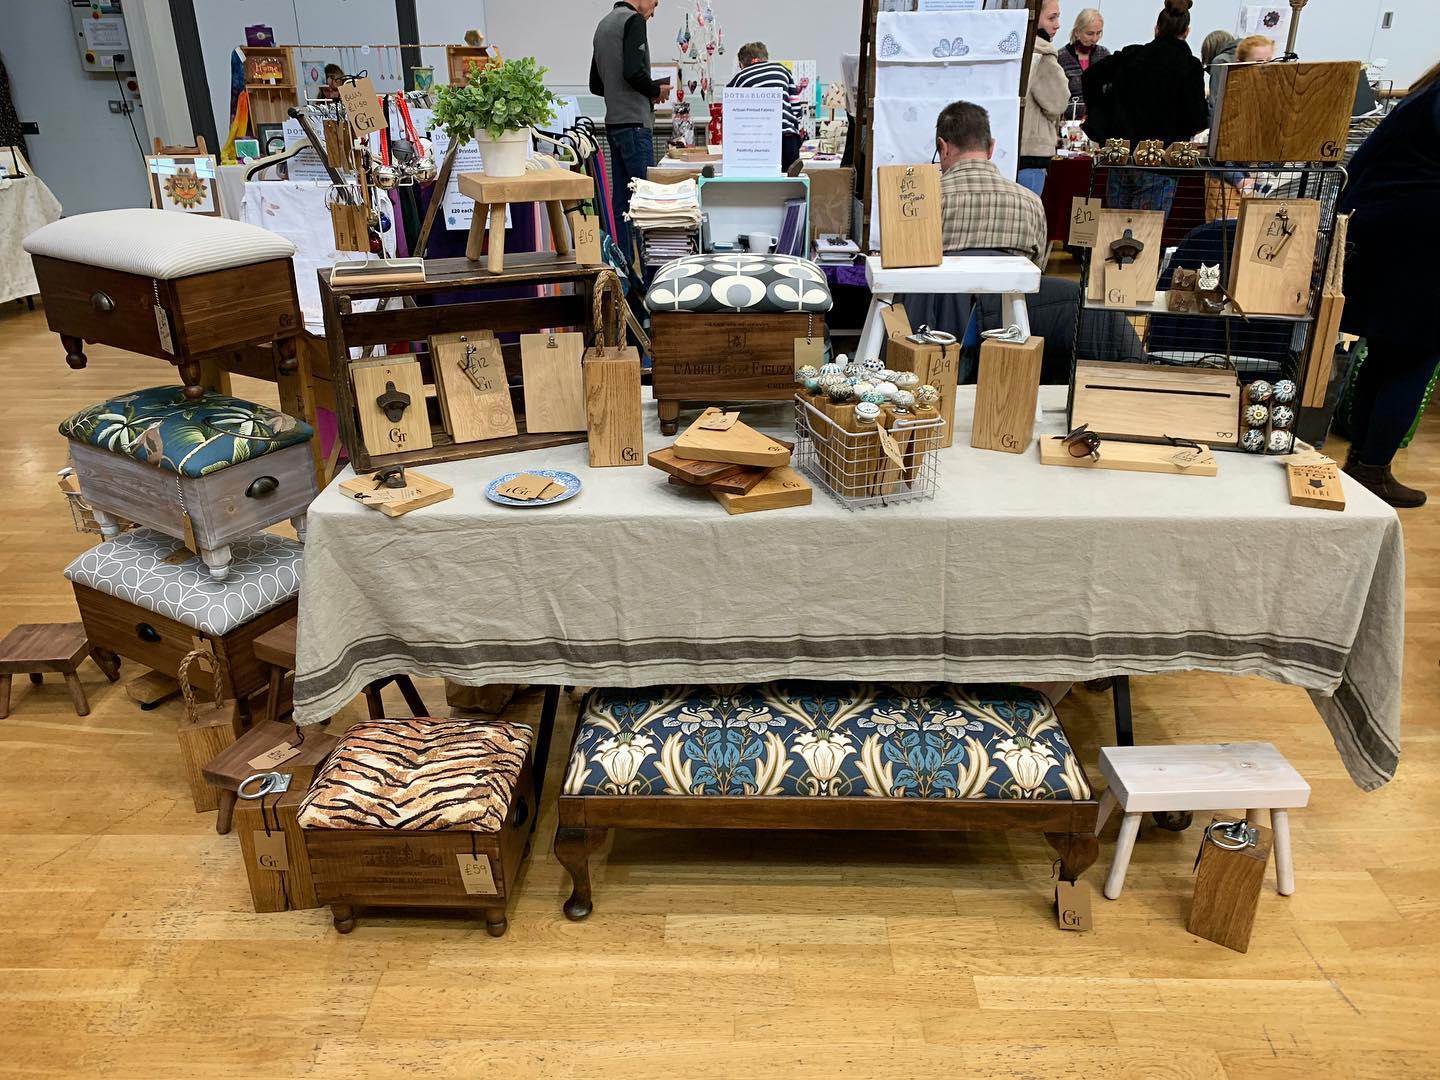 All set up at @madeinboa St Margrets Hall in Bradford On Avon. Here until 3pmYou can also find us at @lowden_garden_centre until 4pm!